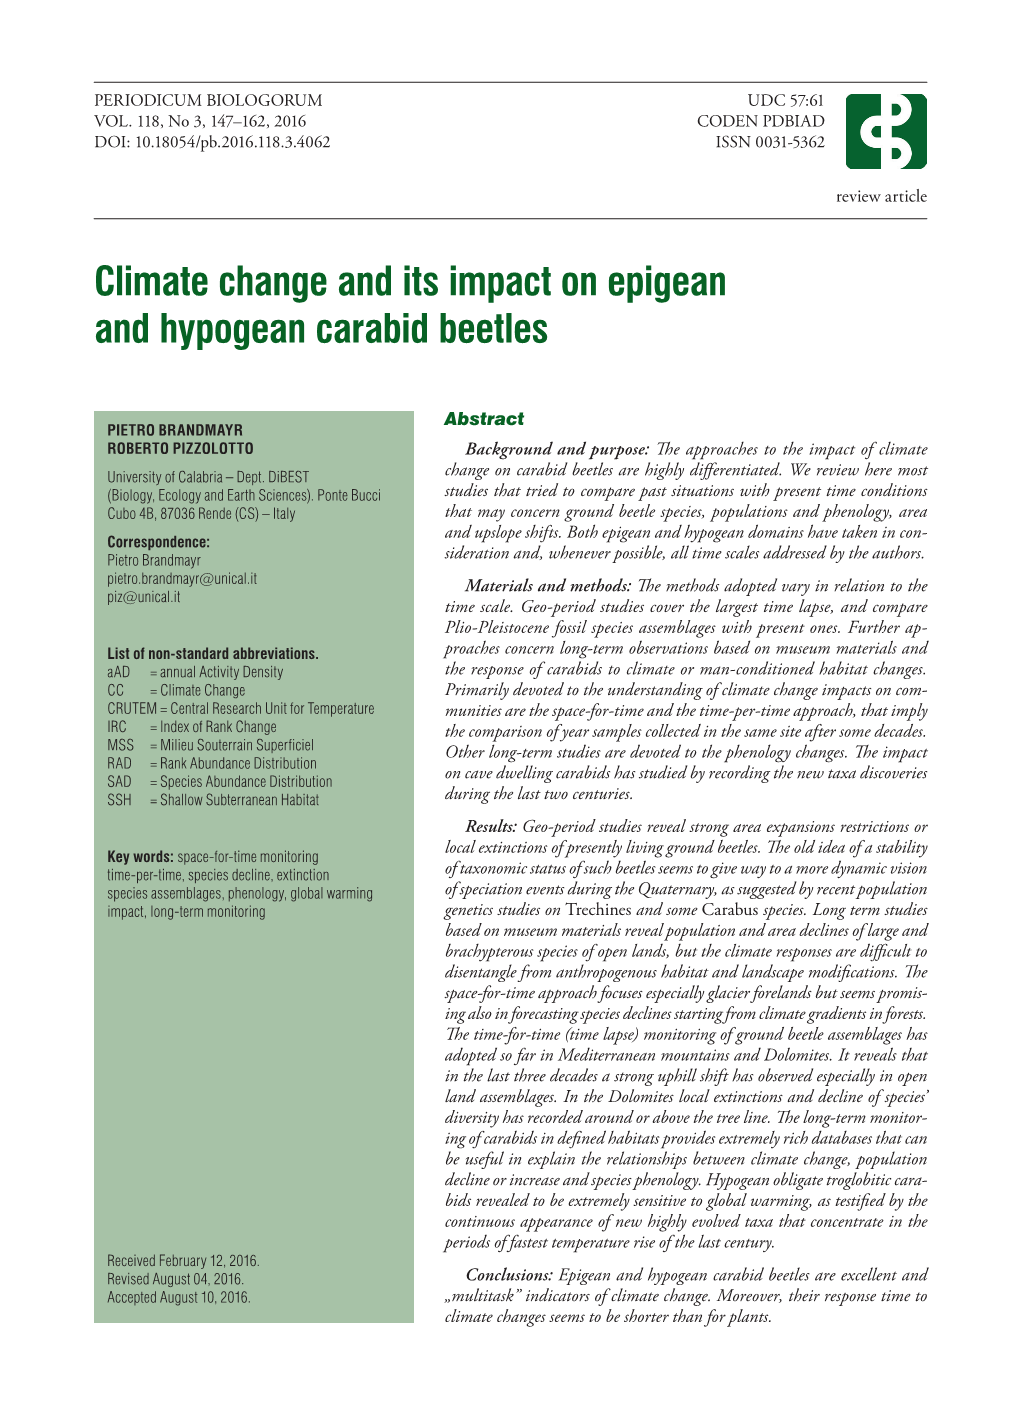 Climate Change and Its Impact on Epigean and Hypogean Carabid Beetles